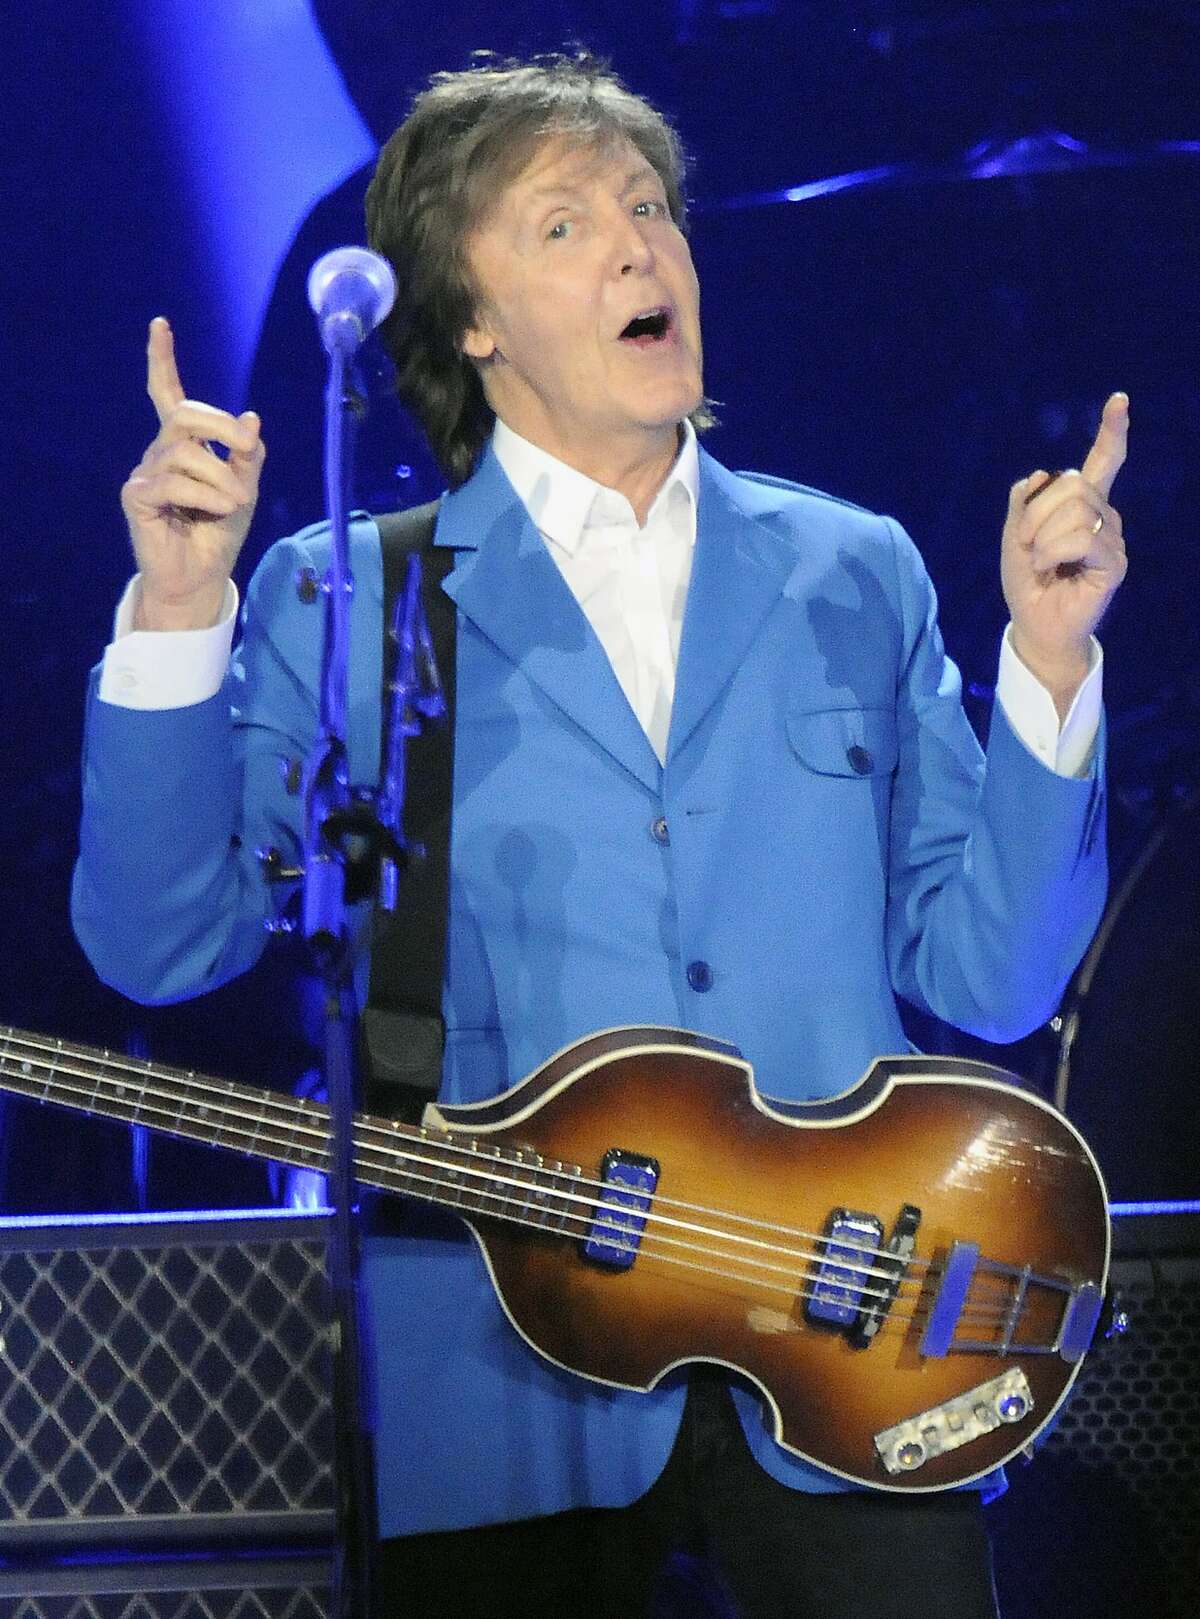 Sir Paul McCartney performs with his band during the “Out There" Tour at the Times Union Center on Saturday, July 5, 2014, in Albany, N.Y. (Photo by Hans Pennink/Invision/AP)